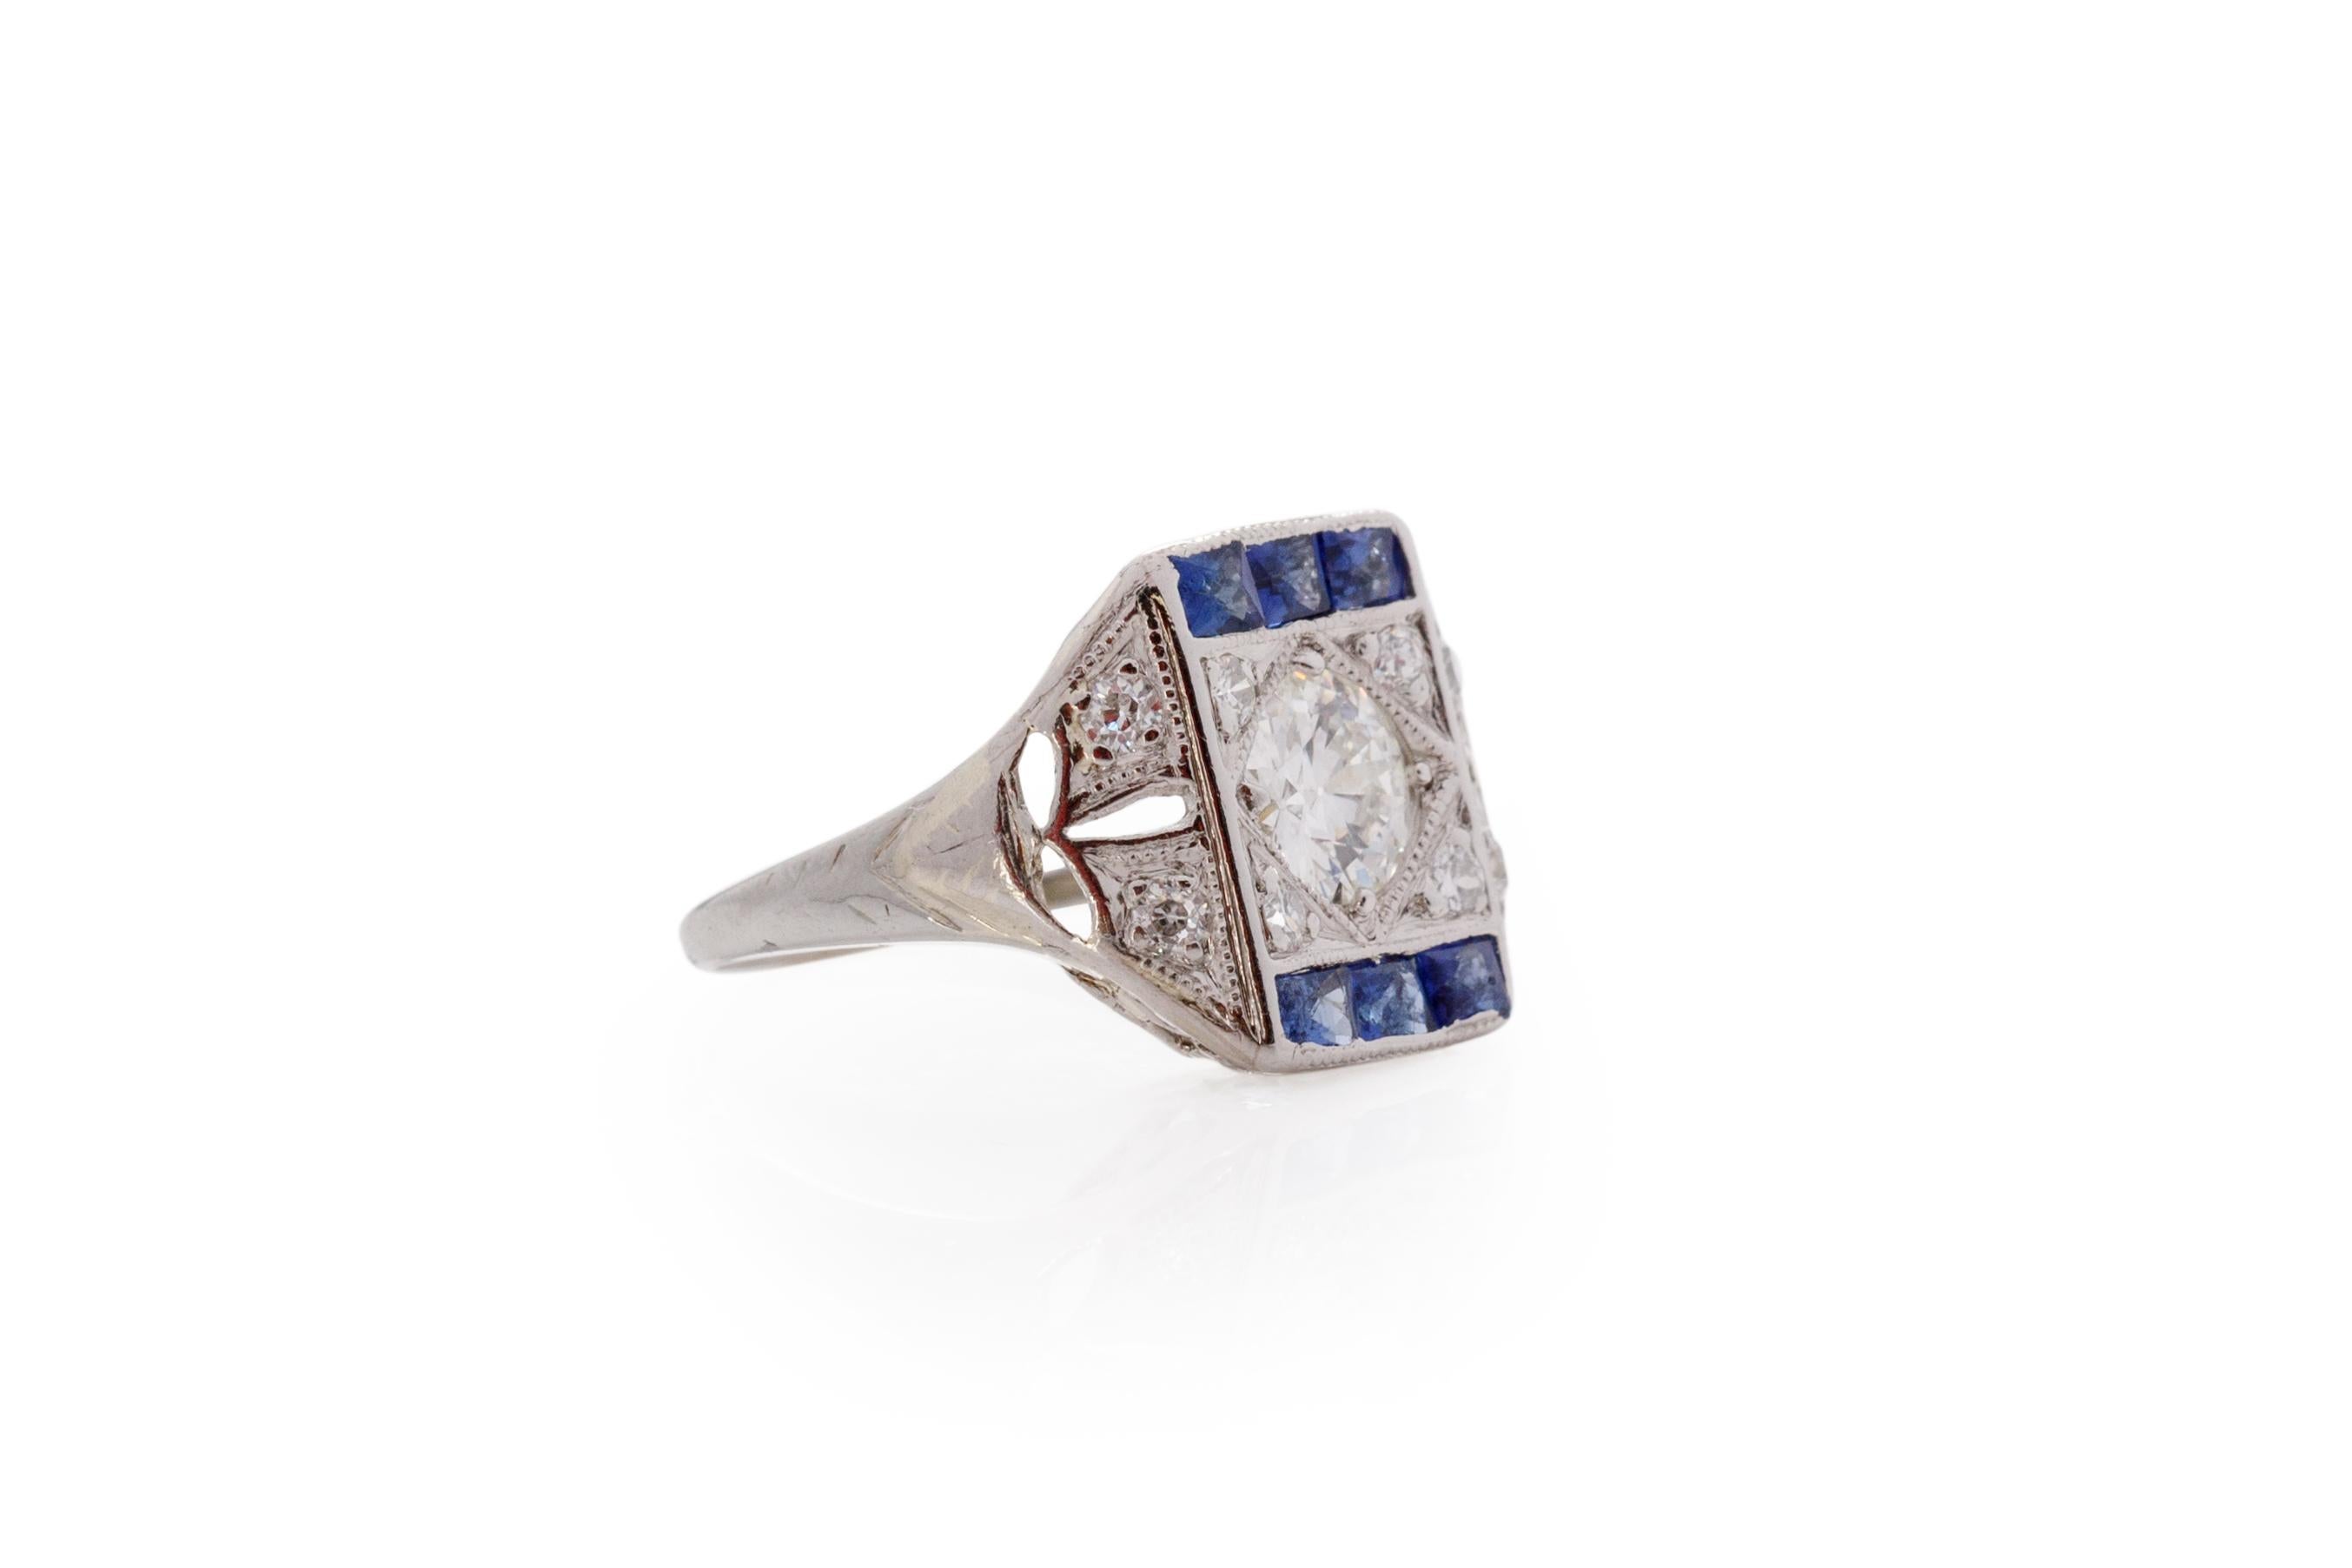 Ring Size: 4
Metal Type: Platinum [Hallmarked, and Tested]
Weight: 3.0 grams

Center Diamond Details:
Weight: .55 carat
Cut: Old European brilliant
Color: E
Clarity: VS1

Side Stone Details:
Weight: .06 carat total weight
Cut: Antique Single